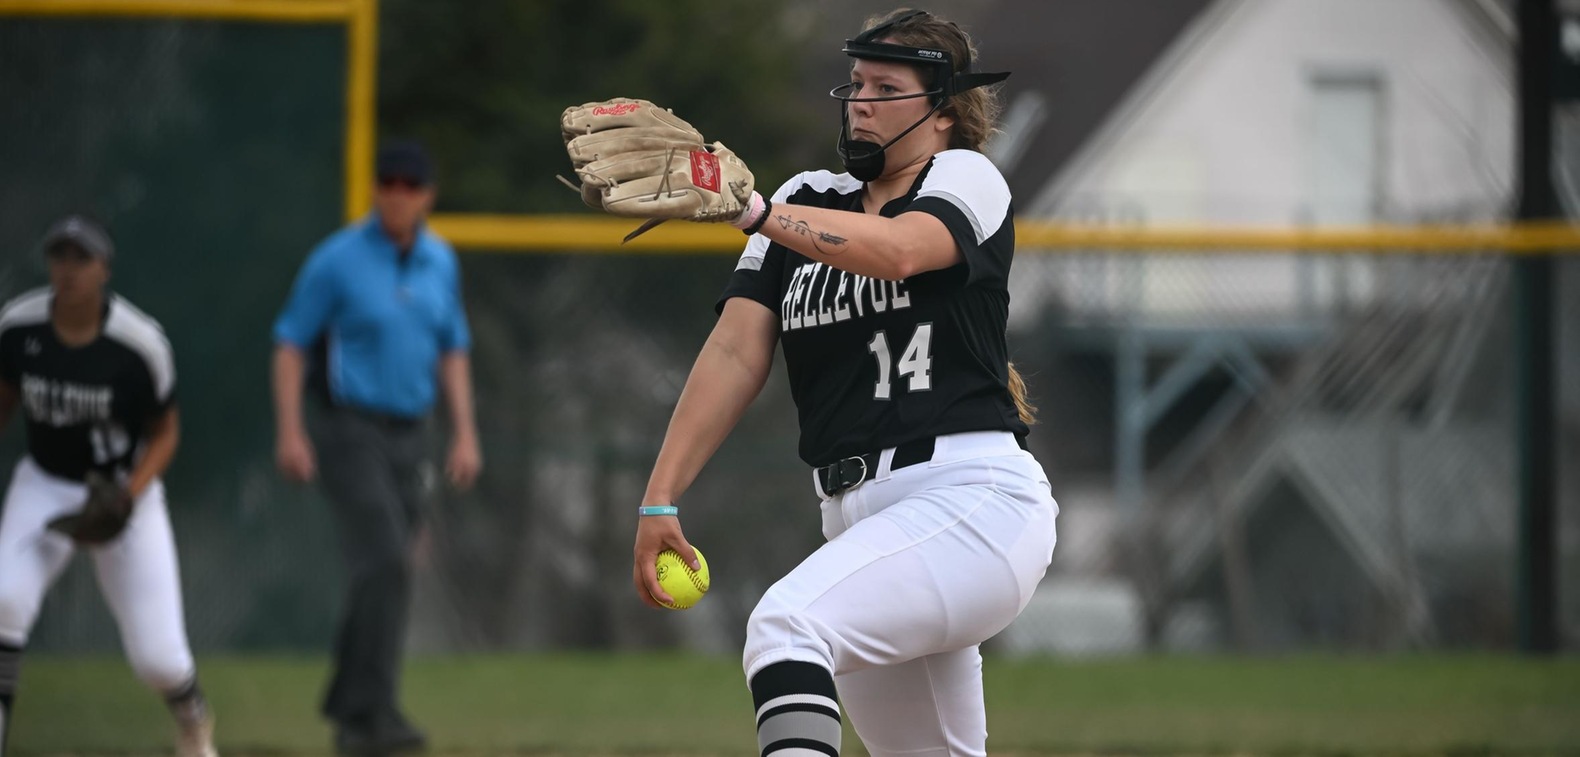 Katie Cunningham recorded 12 strikeouts on the day.